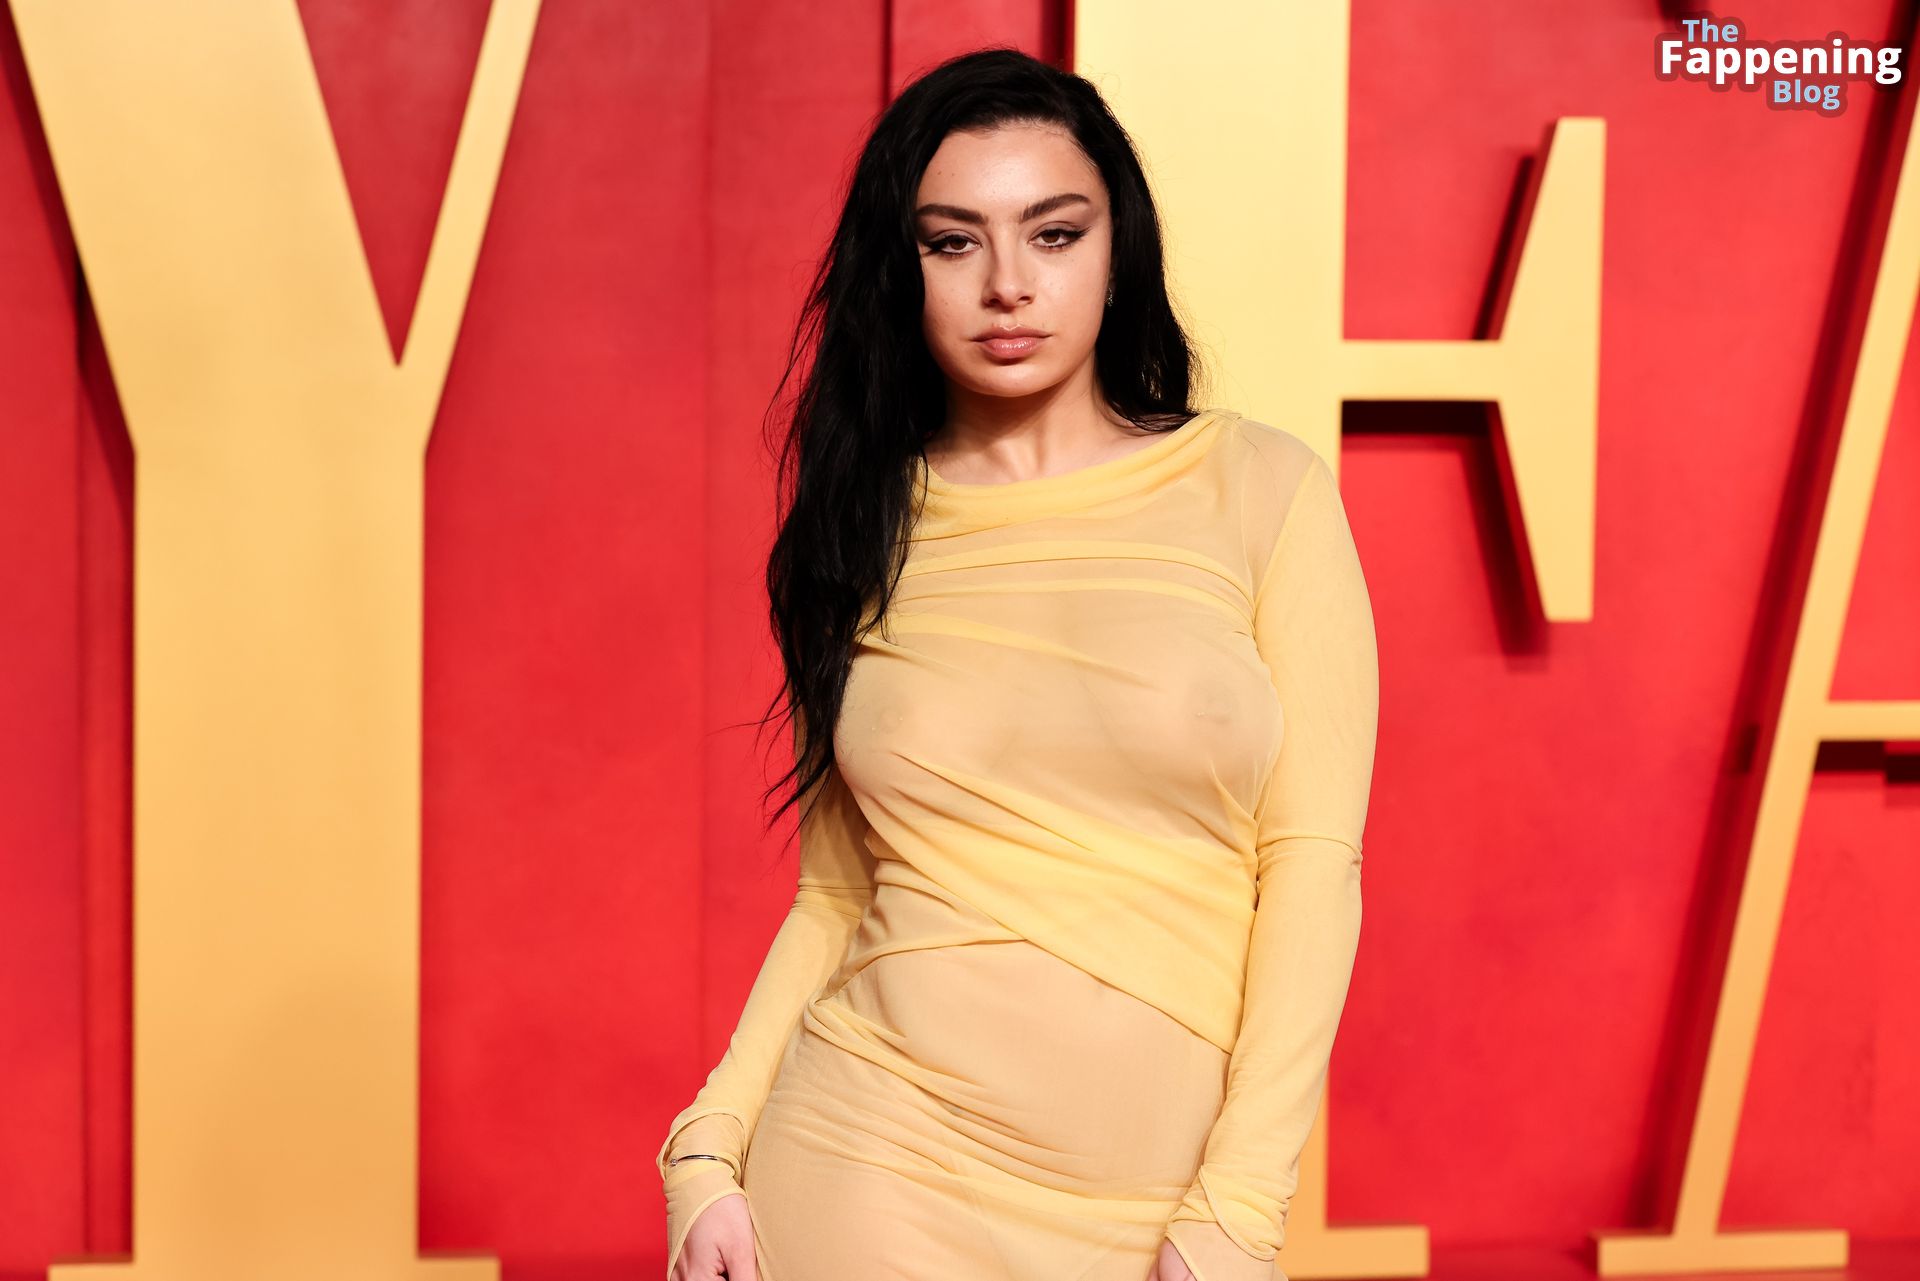 Charli-XCX-Nude-Sexy-22-The-Fappening-Blog.jpg